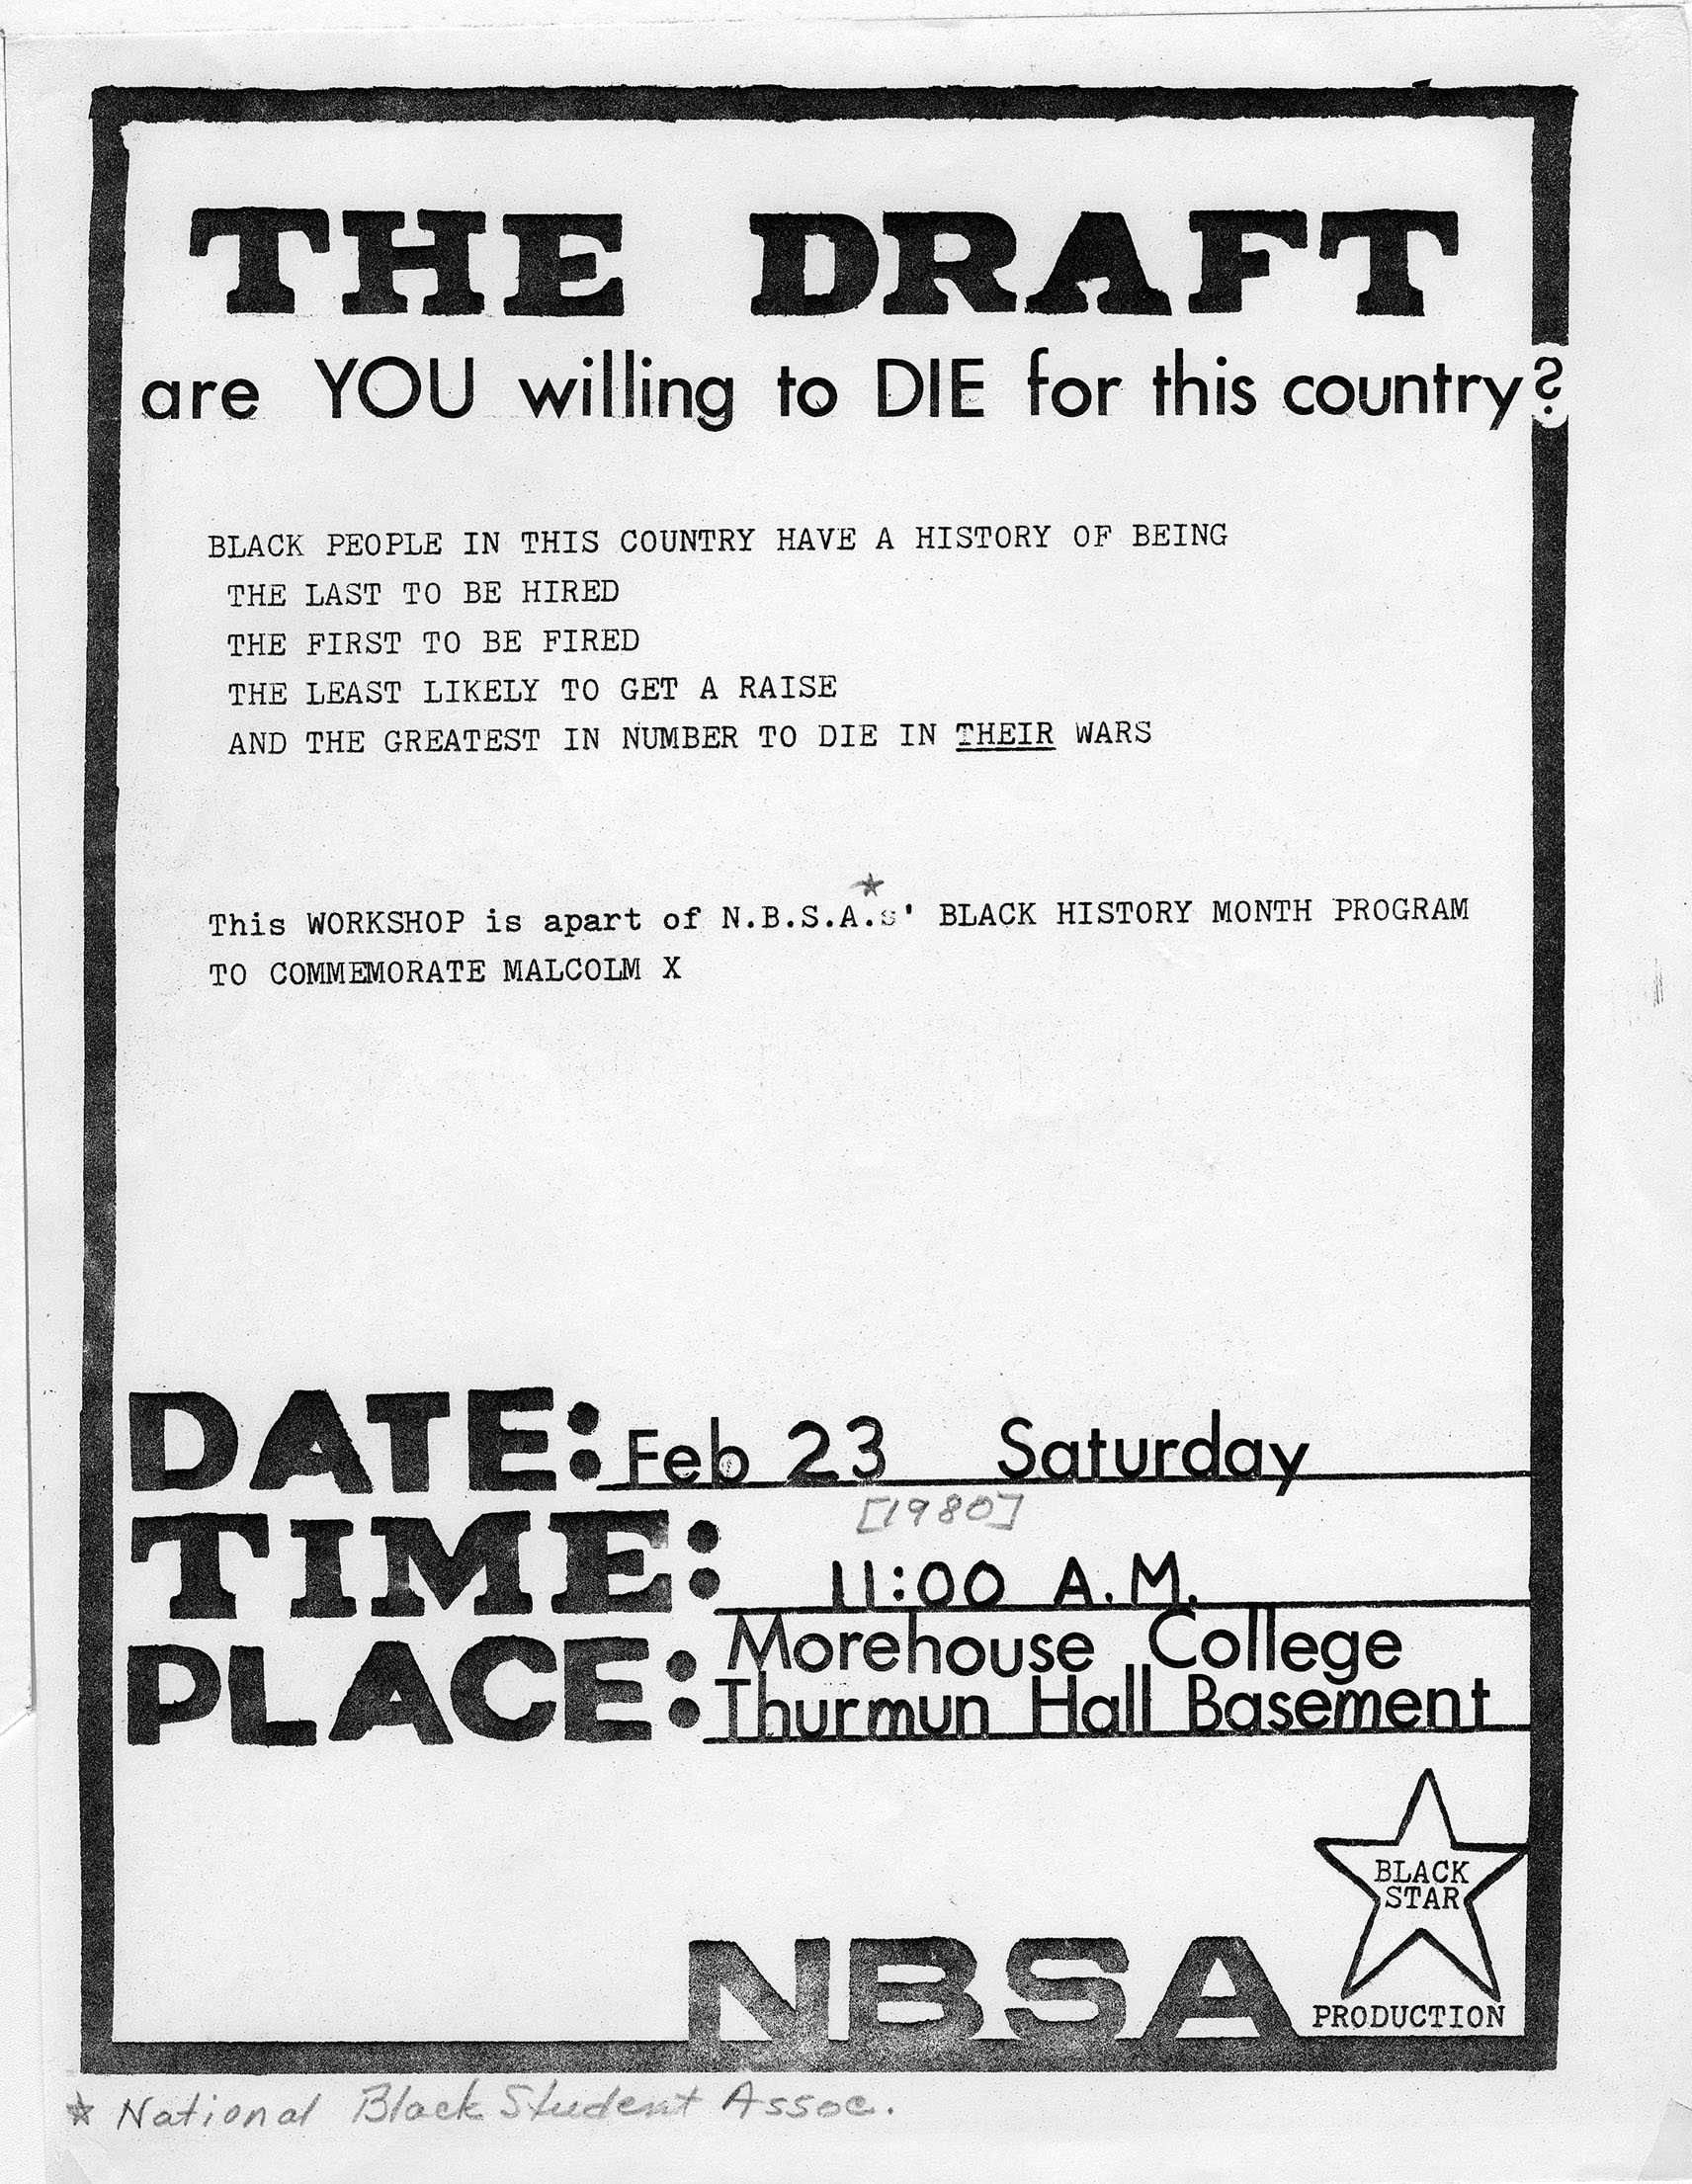 "The Draft: are YOU willing to DIE for this country?", Morehouse College (Atlanta, Ga.), undated, Morehouse Vertical File